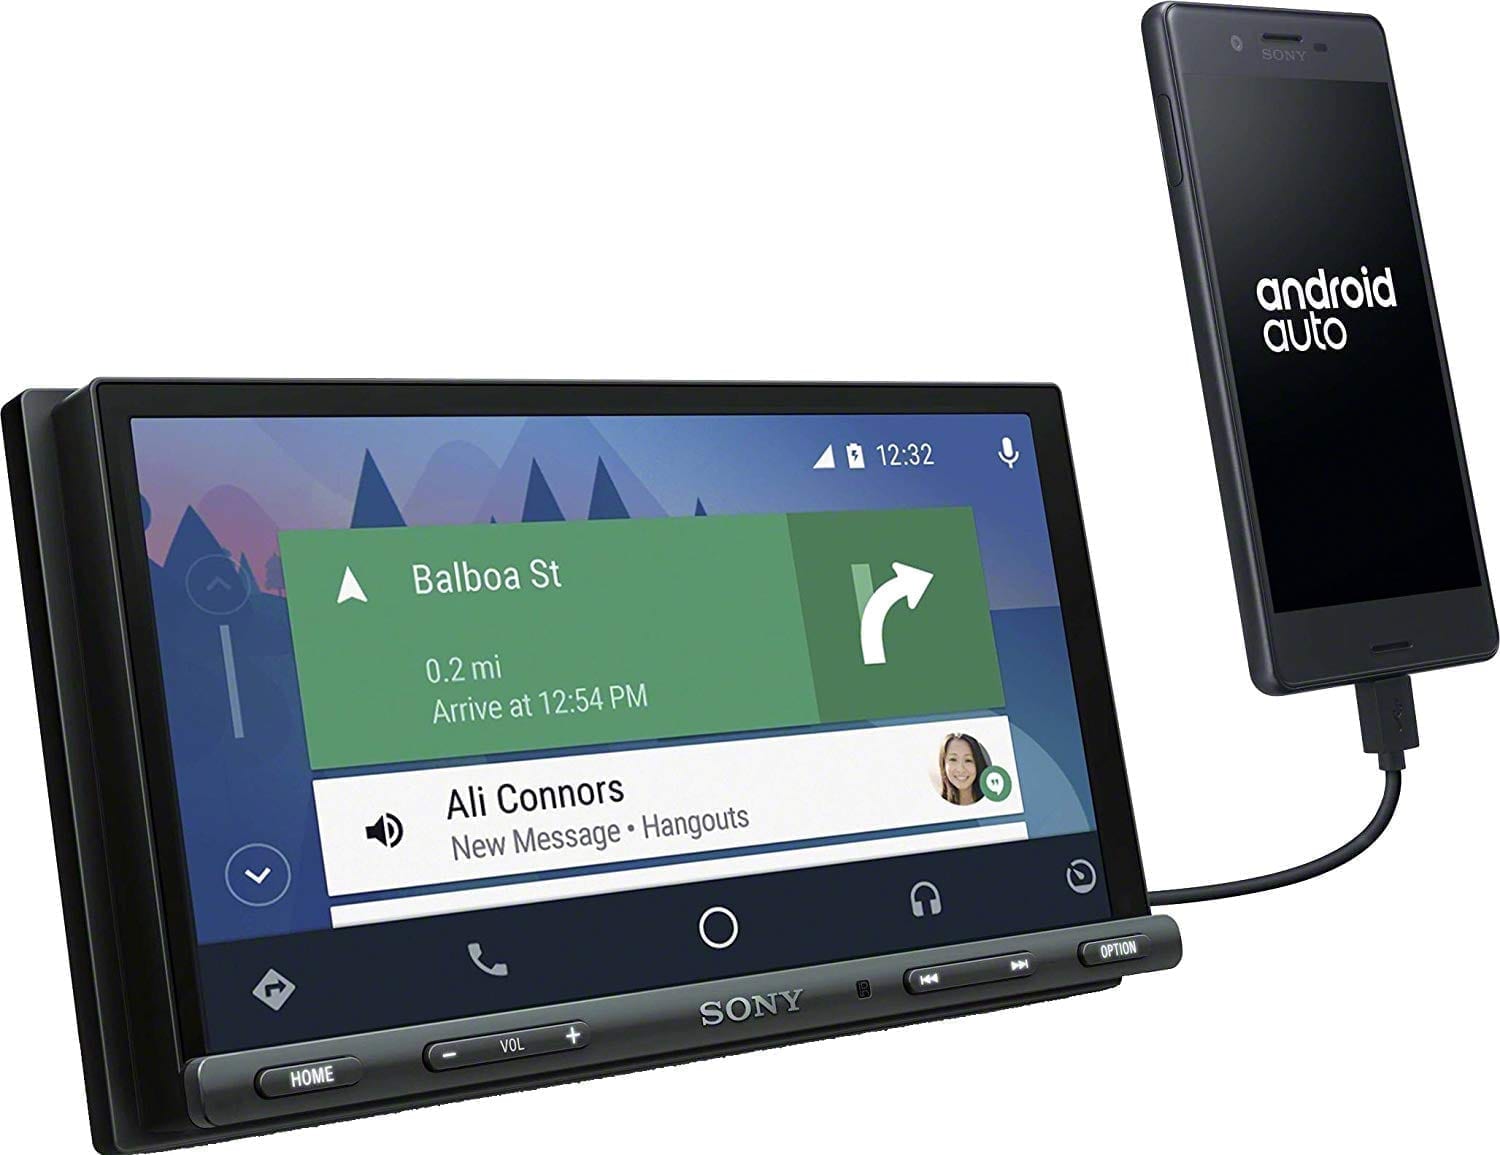 Sony XAV-AX5000 angle view with android auto and navigation on screen